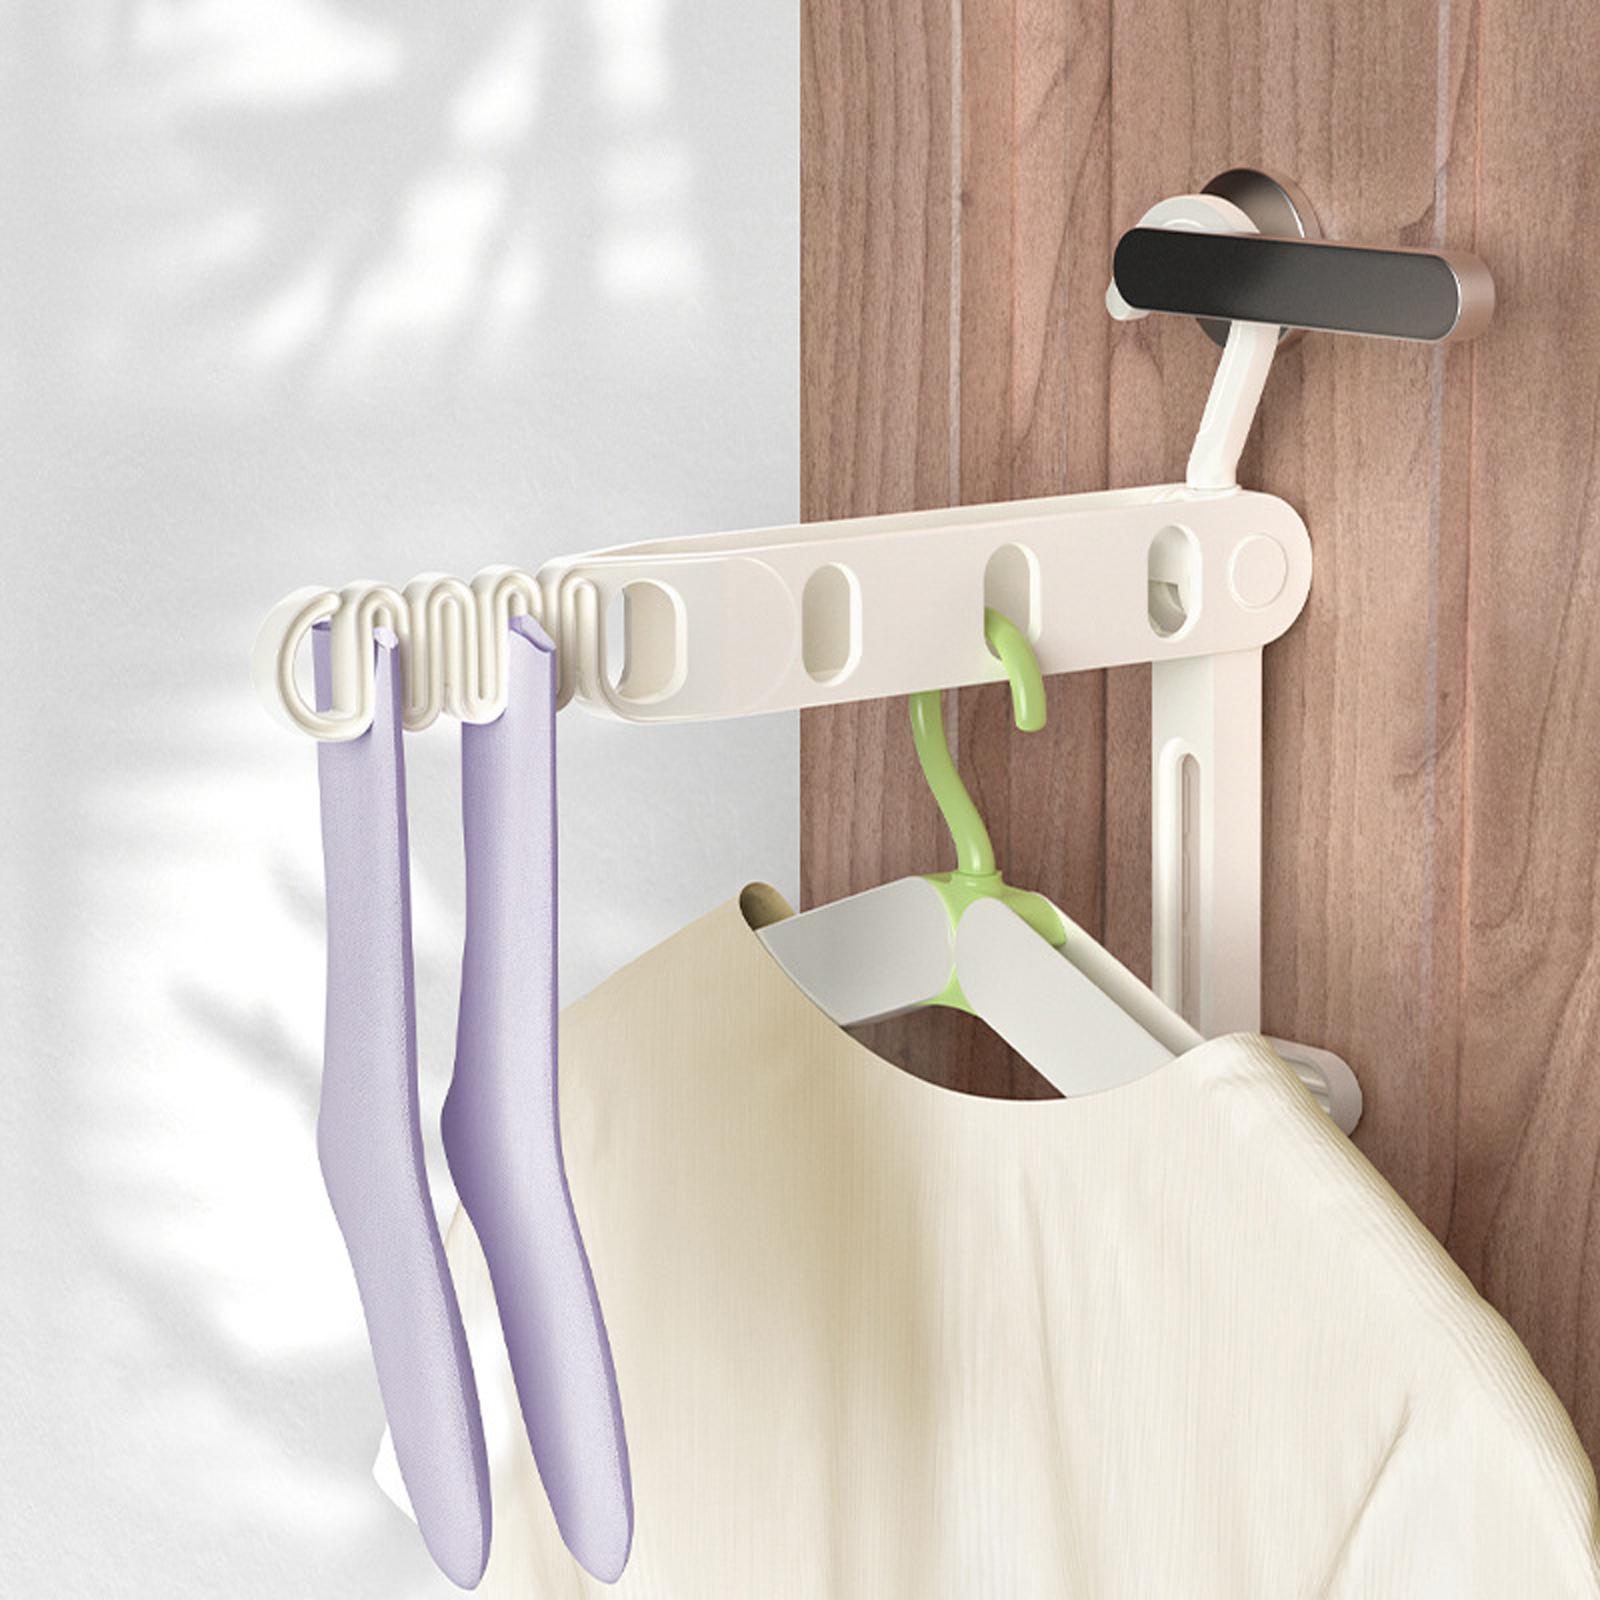 Folding Clothes Hanger Folding Clothes Drying Rack for Hotel Camping Outdoor